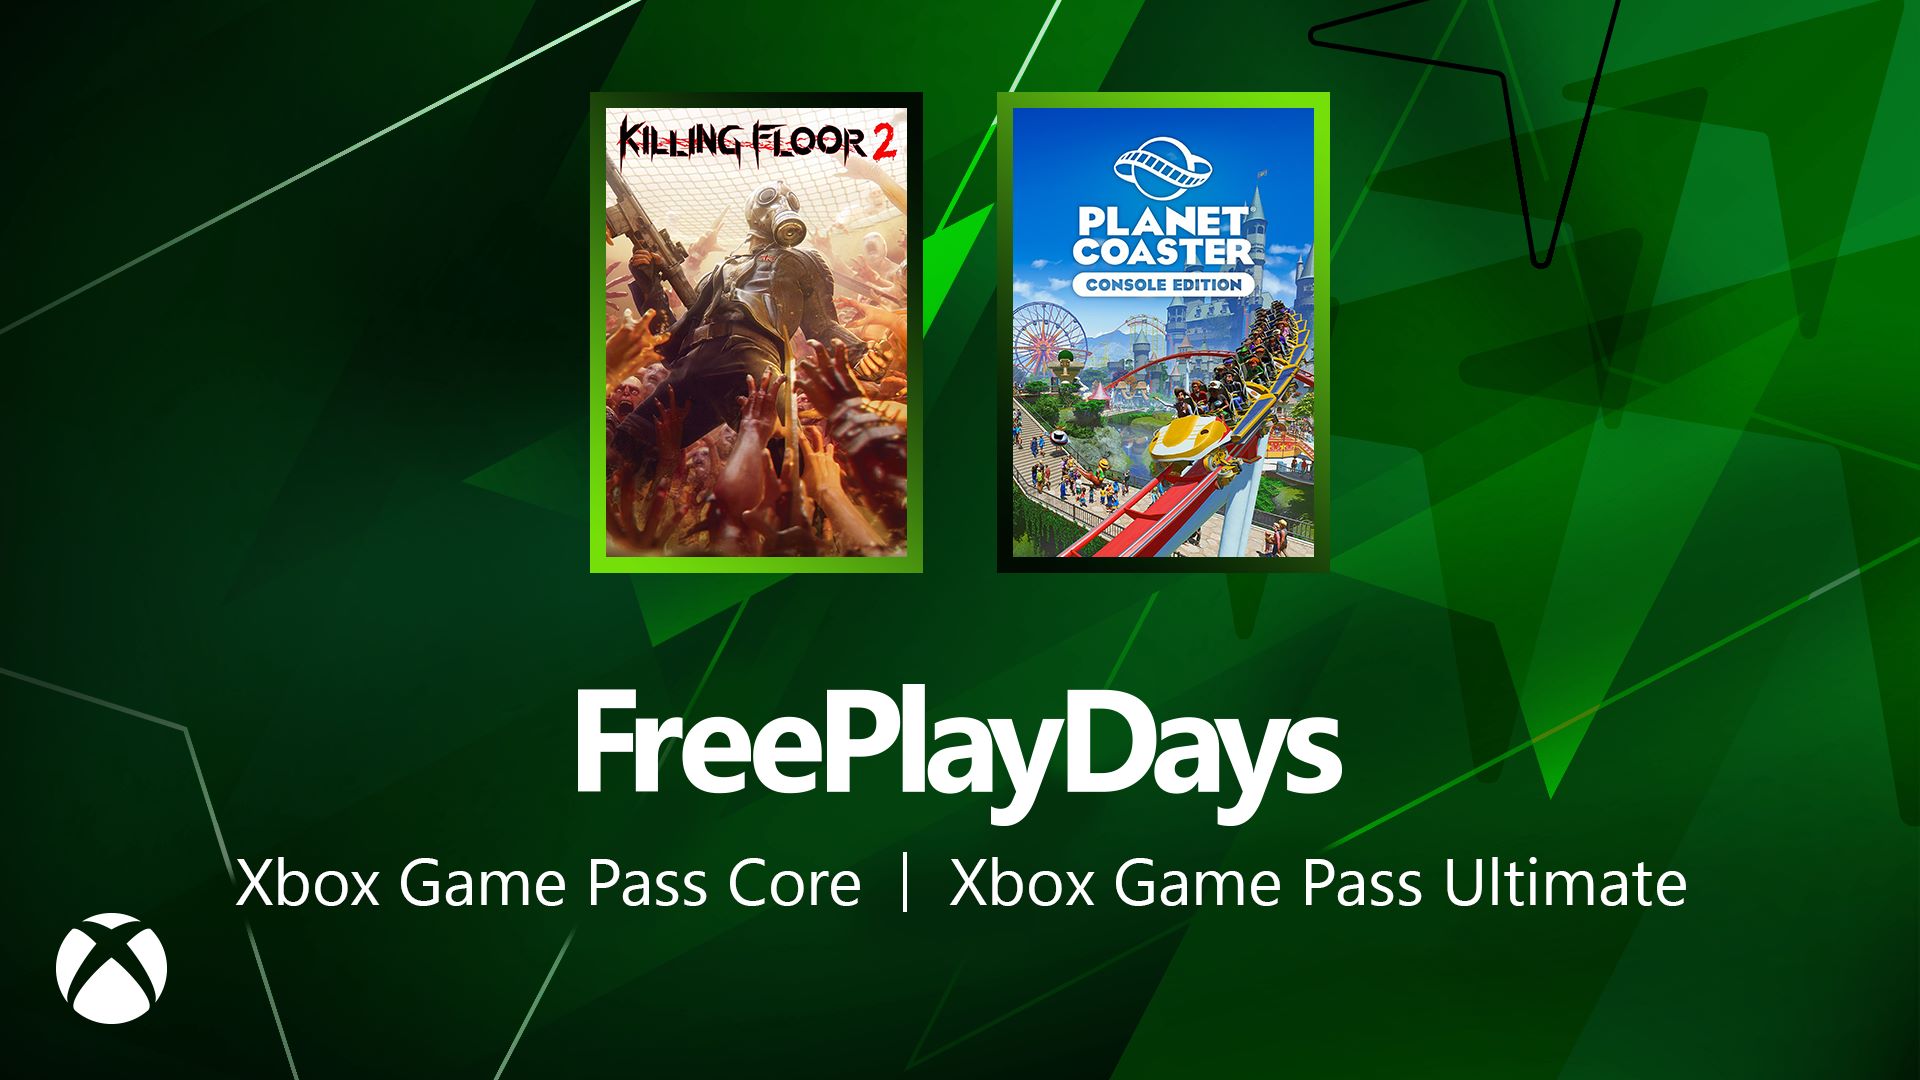 Free Play Days – Killing Floor 2 and Planet Coaster: Console Edition